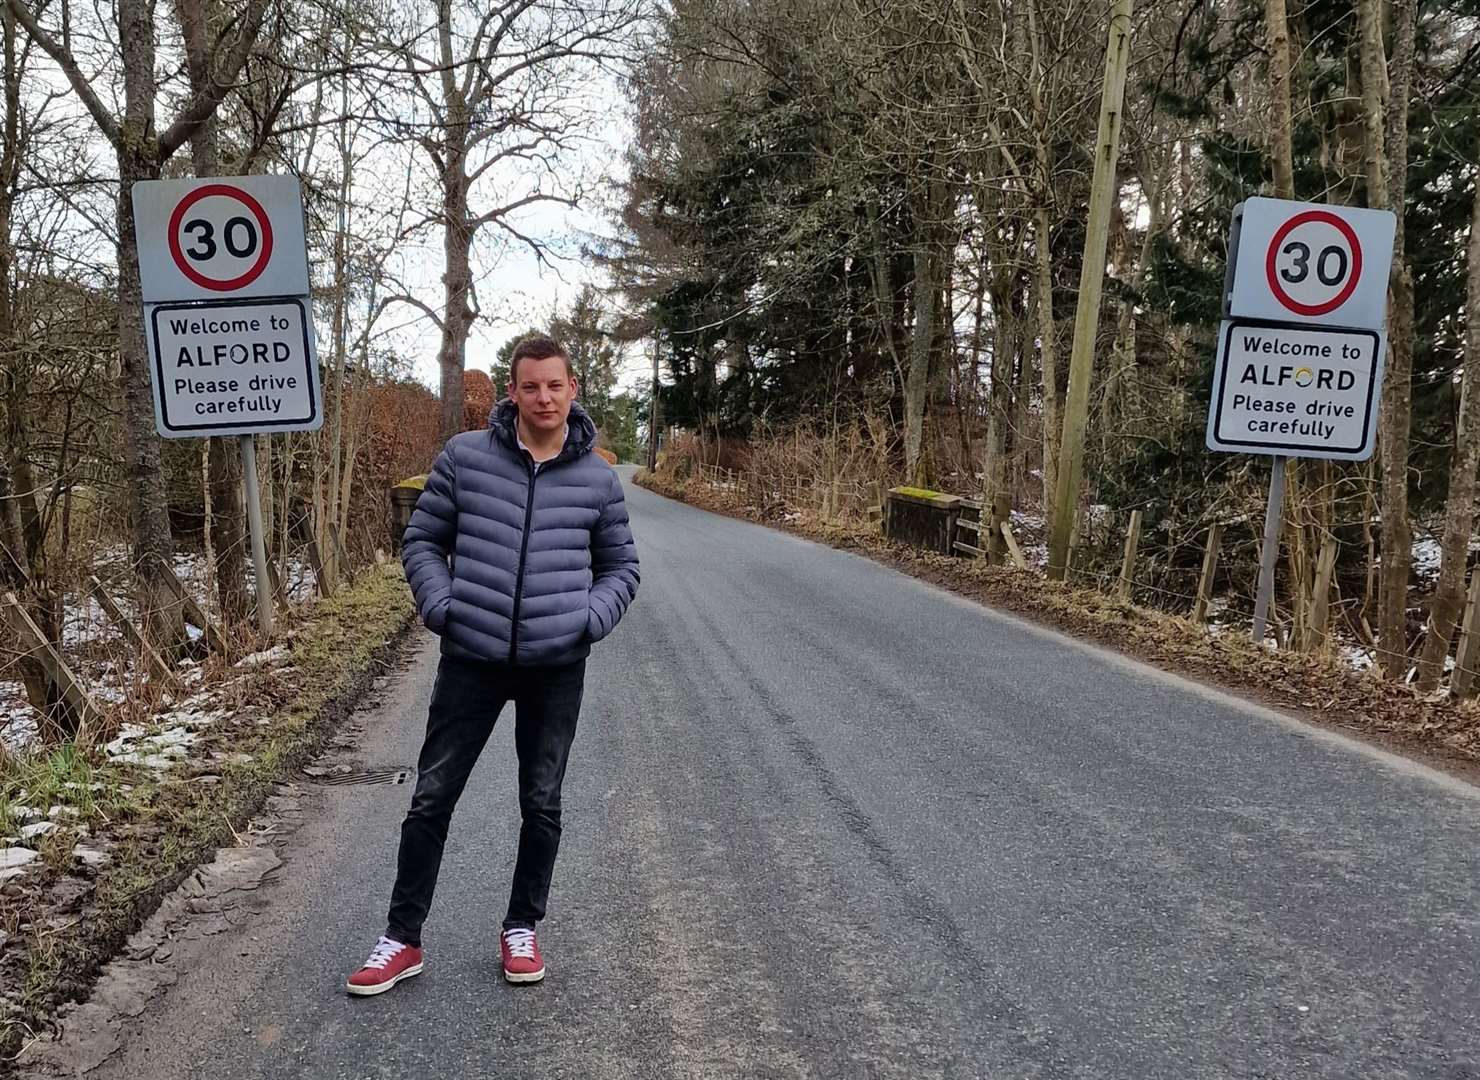 Councillor Robbie Withey welcomed confirmation that an active travel path will be built between Alford and Montgarrie.